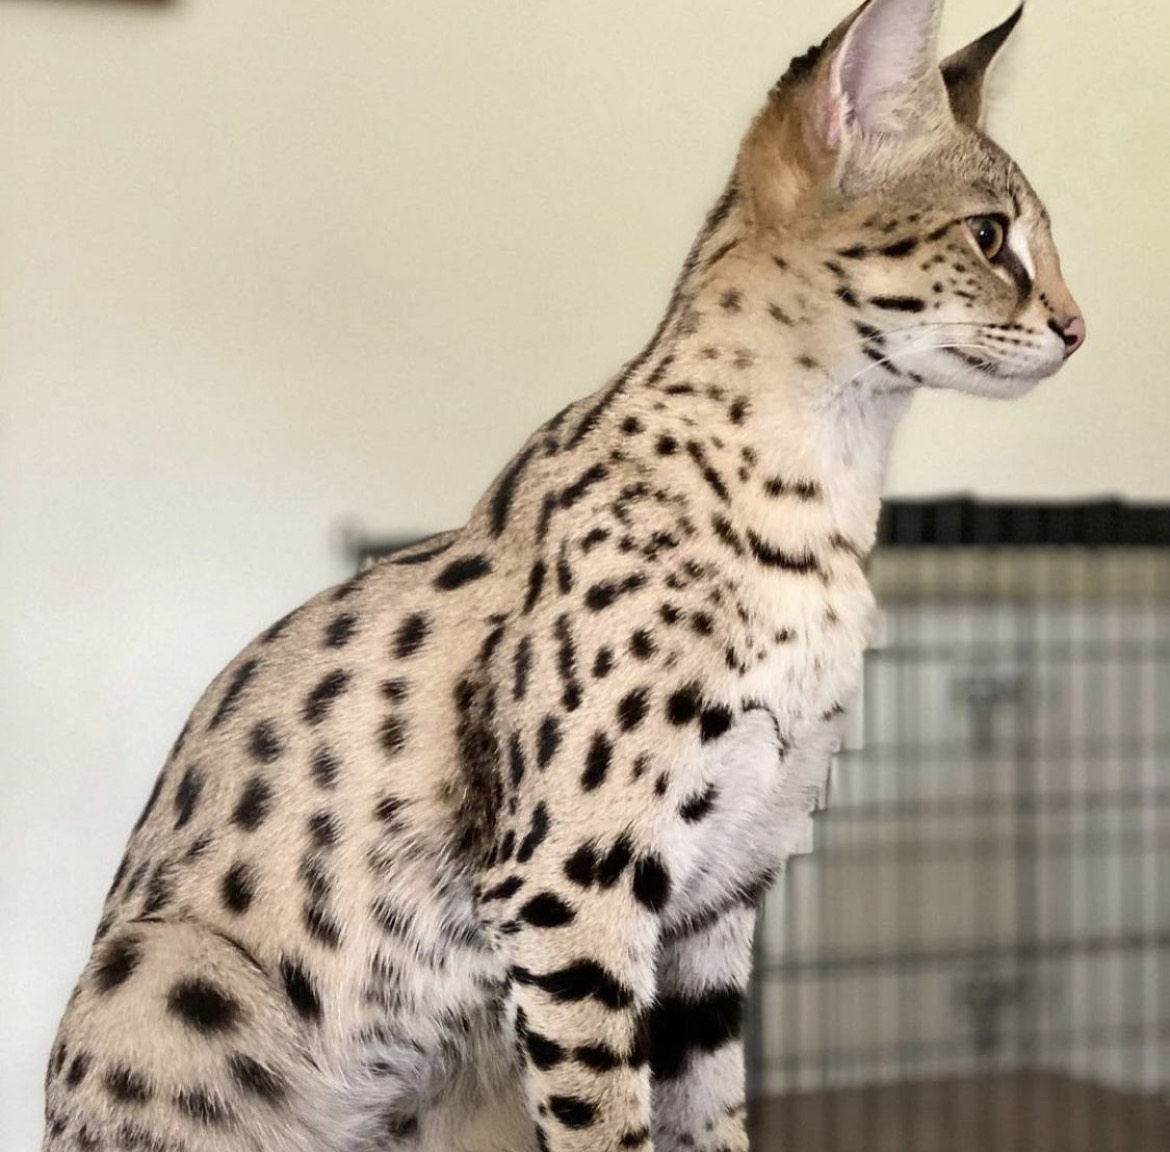 bengal cats for sale | bengal cat price | ocelot pet for sale | ocelot for sale | ocelot cat |  where to buy a savannah cat | bengal kittens for sale near me | real baby tiger for sale